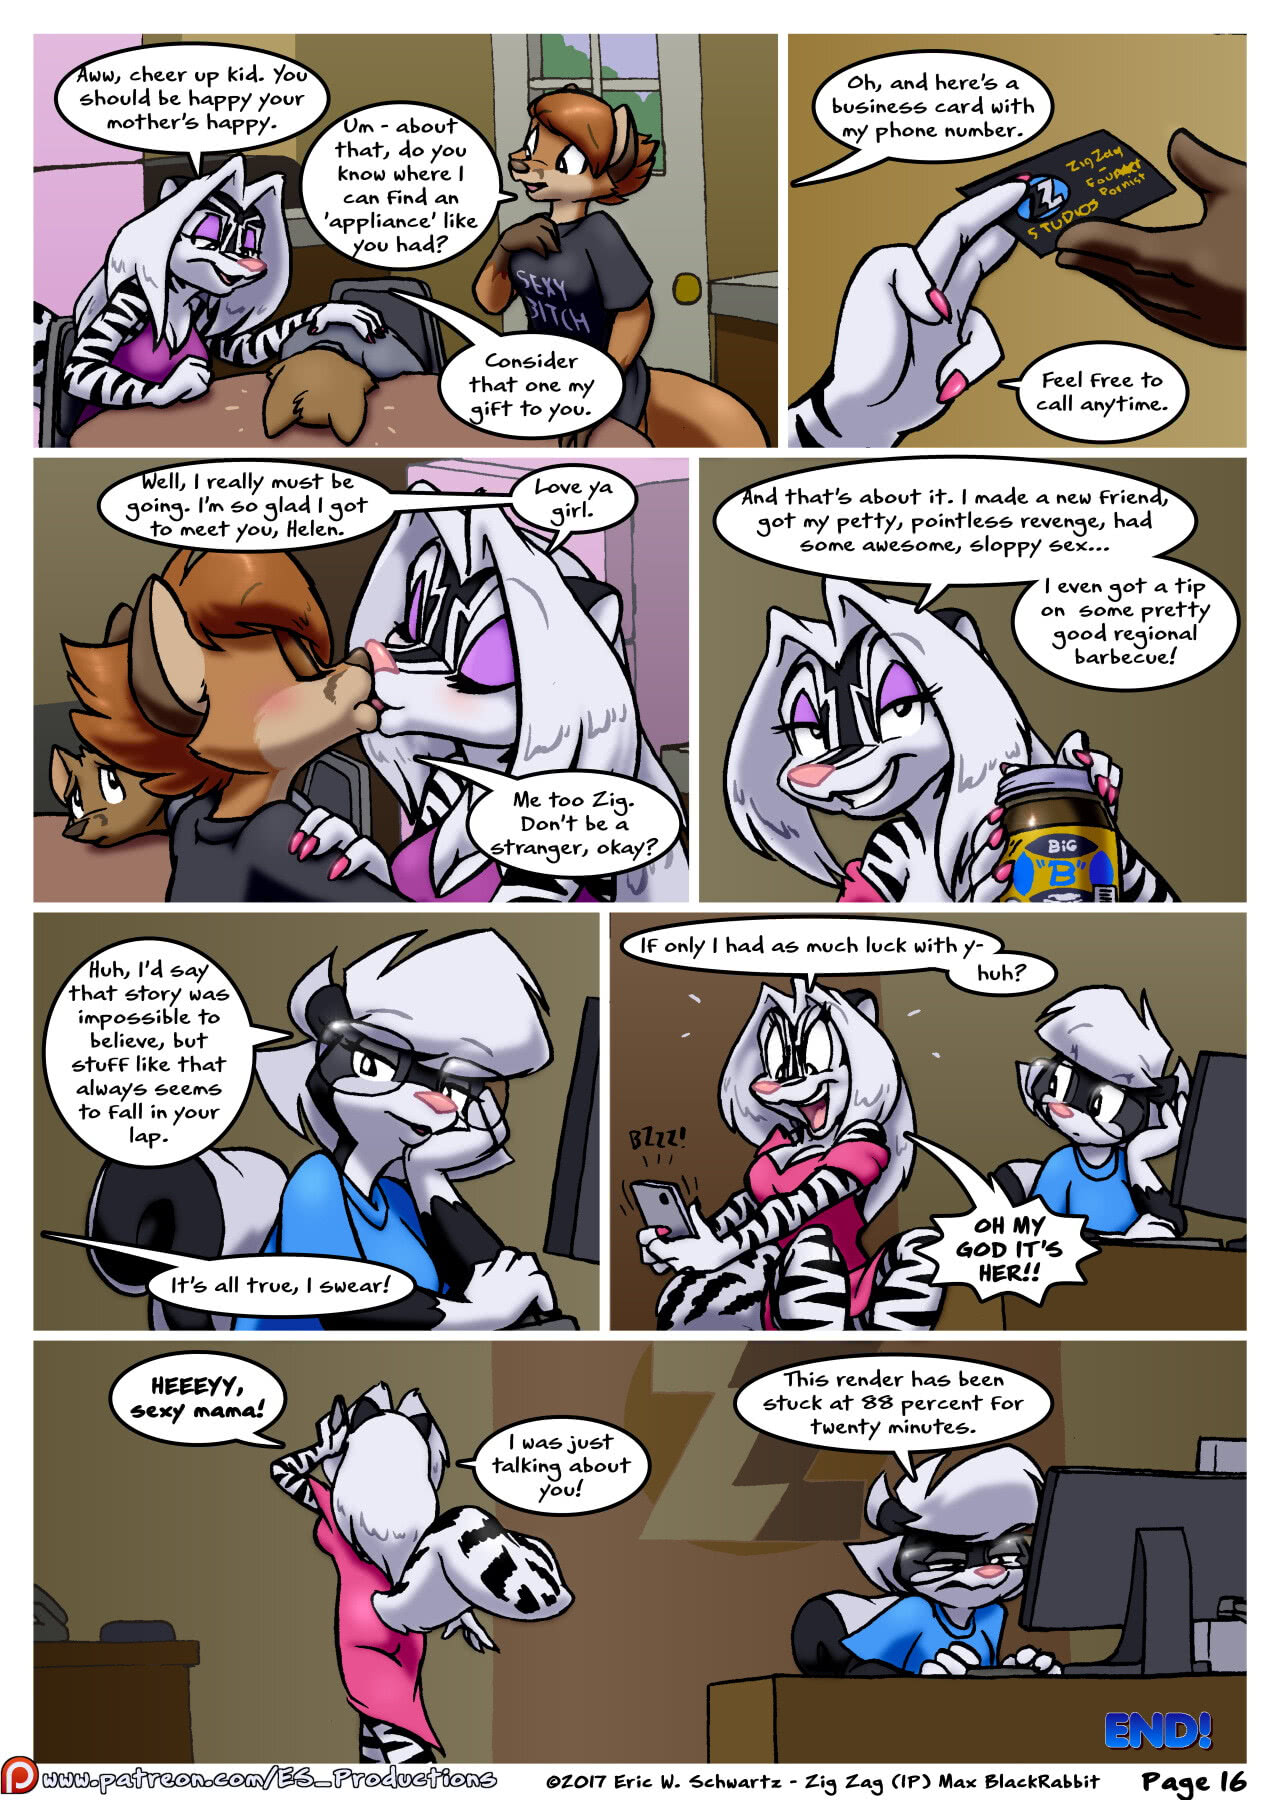 Adventure Begins at Home - Page 17